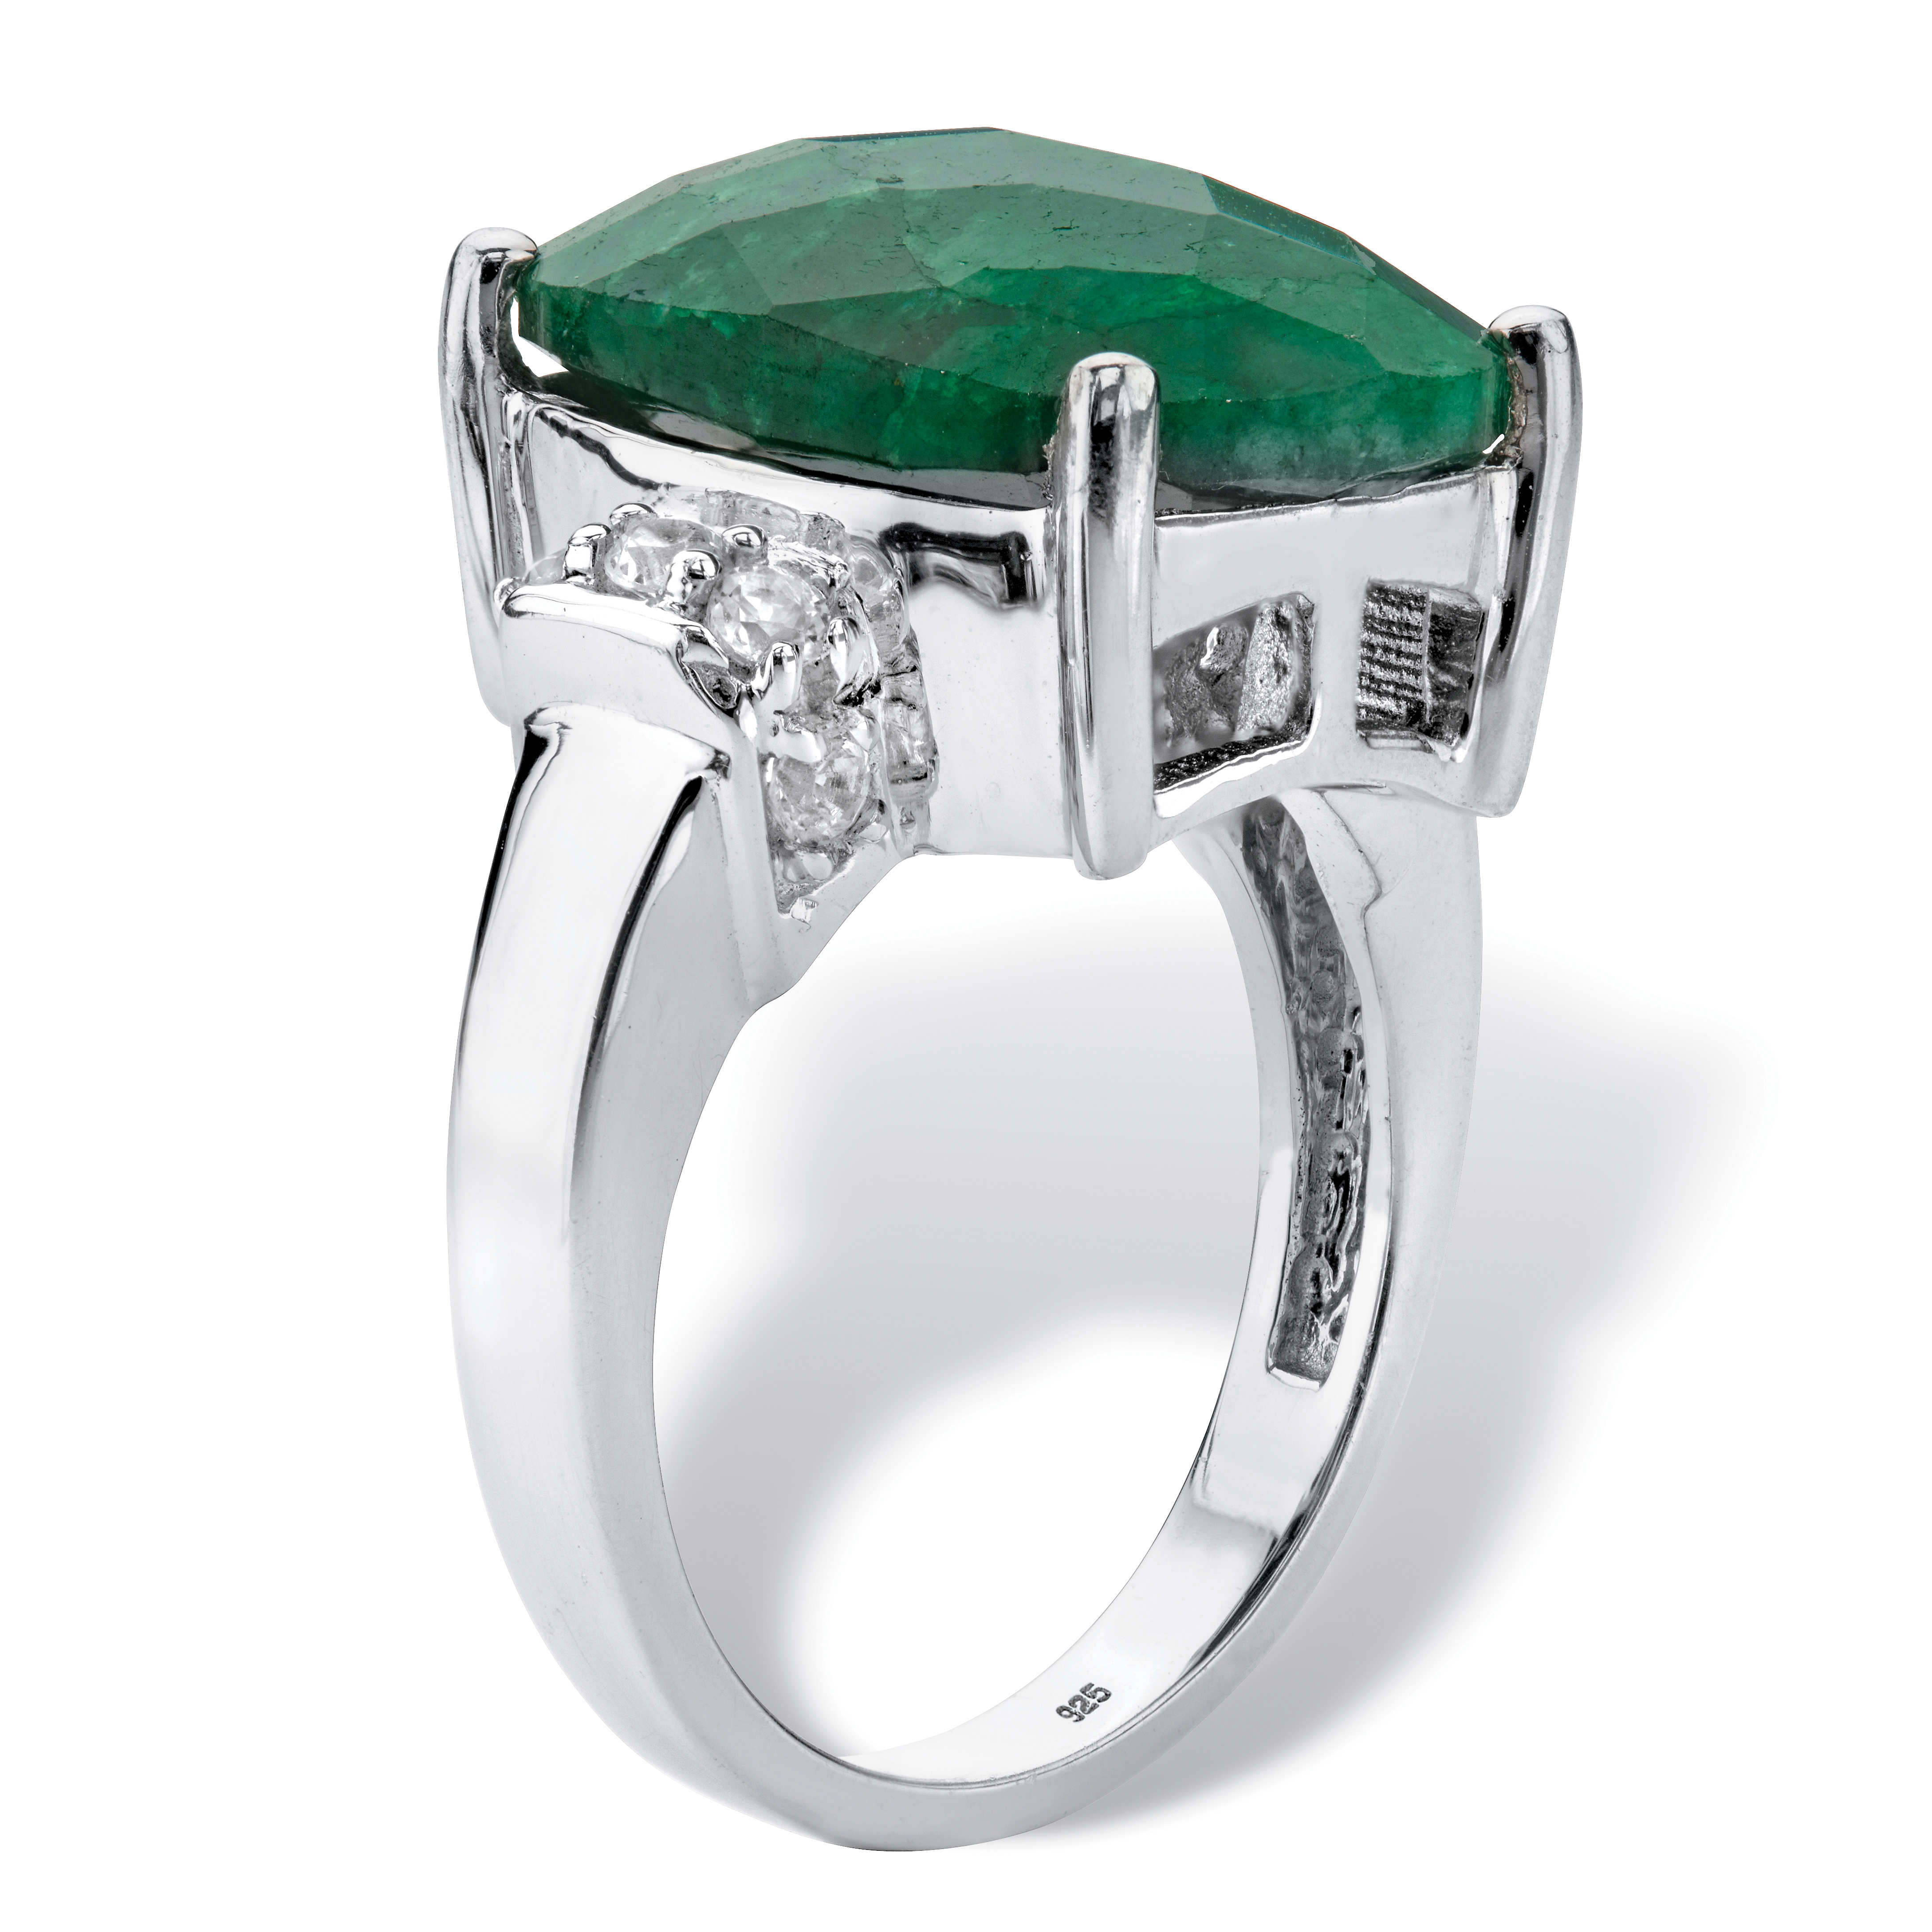 PalmBeach Jewelry Emerald-Cut Genuine Emerald and White Tanzanite Cocktail Ring 8.80 TCW in Sterling Silver